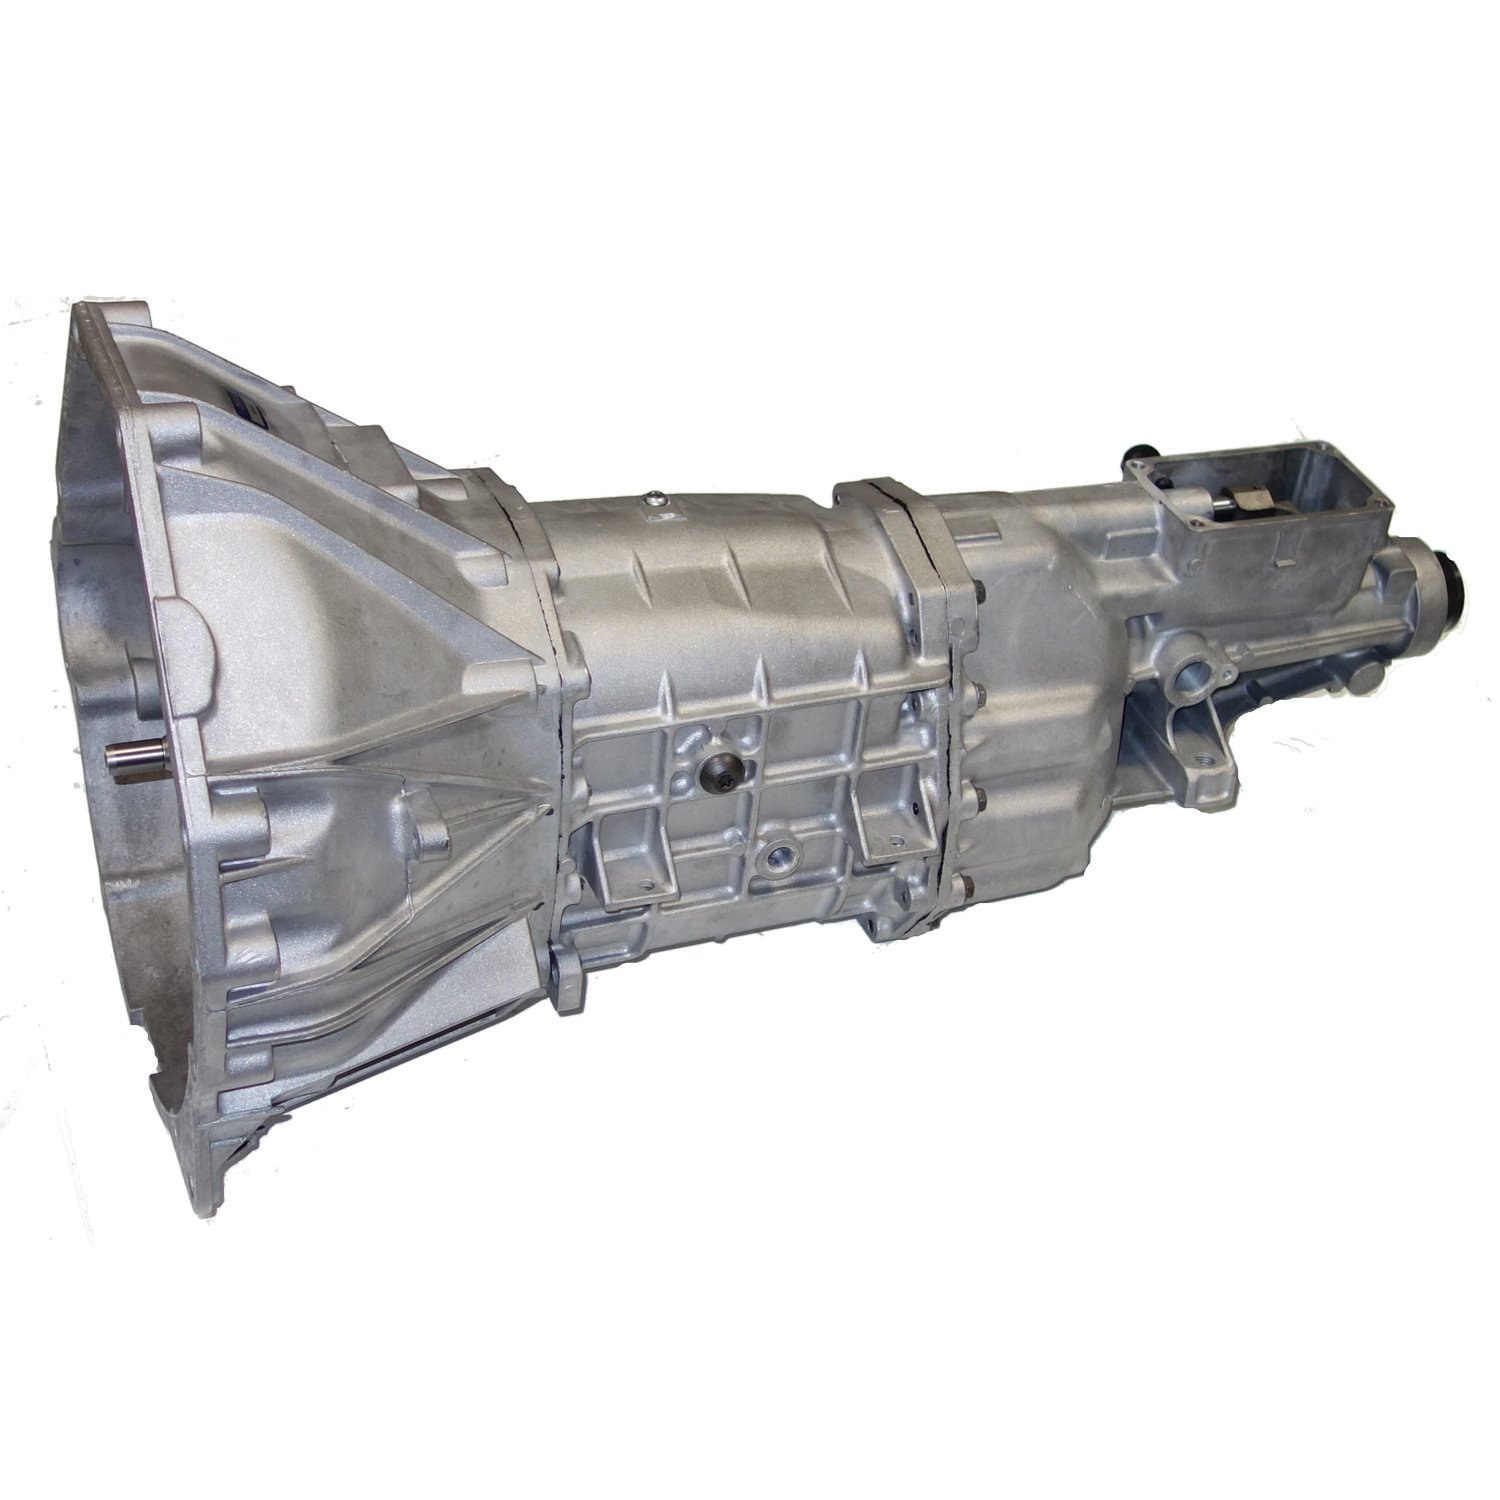 Remanufactured FM145 Manual Transmission for Ford 99-01 Mustang 4.6L, 5 Speed